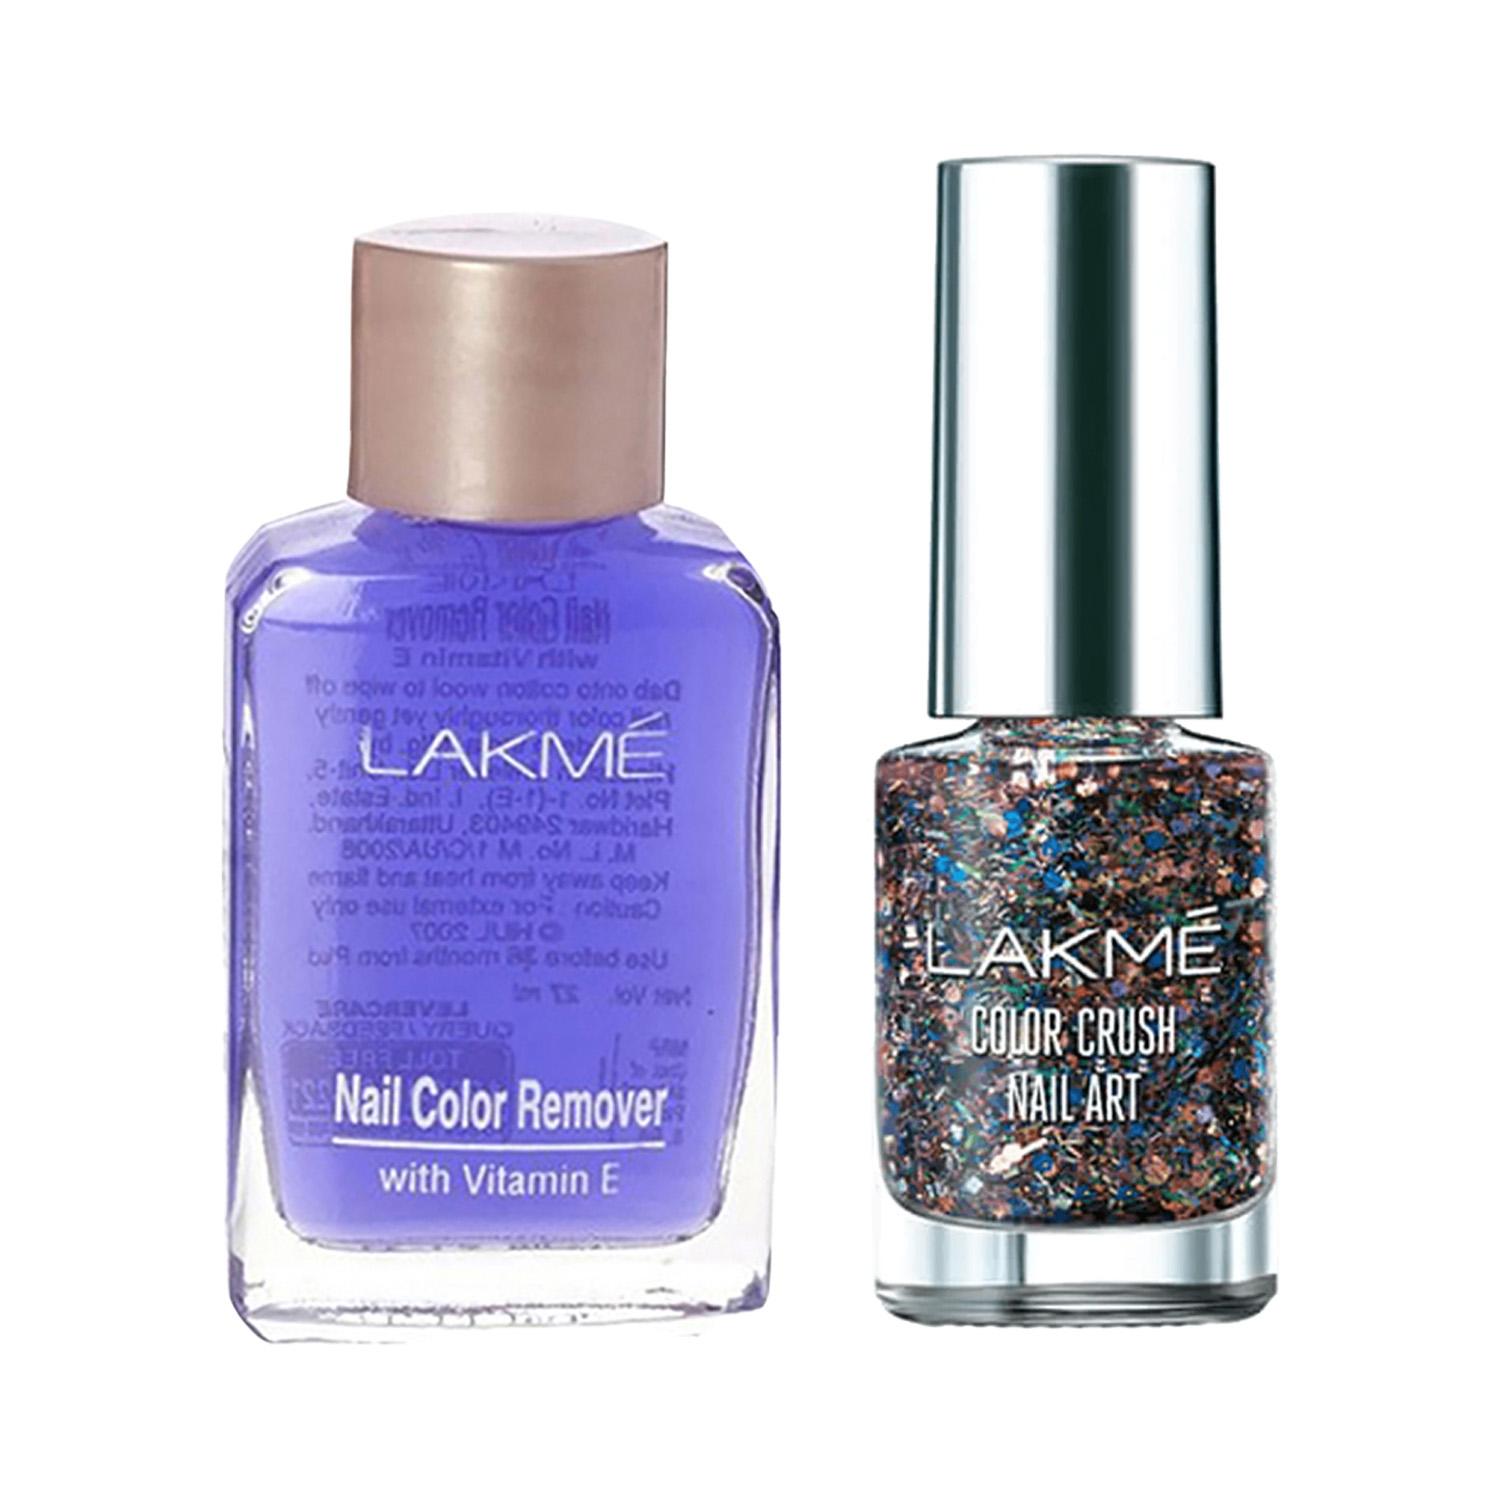 Buy P2 Nails for Women by LAKME Online | Ajio.com